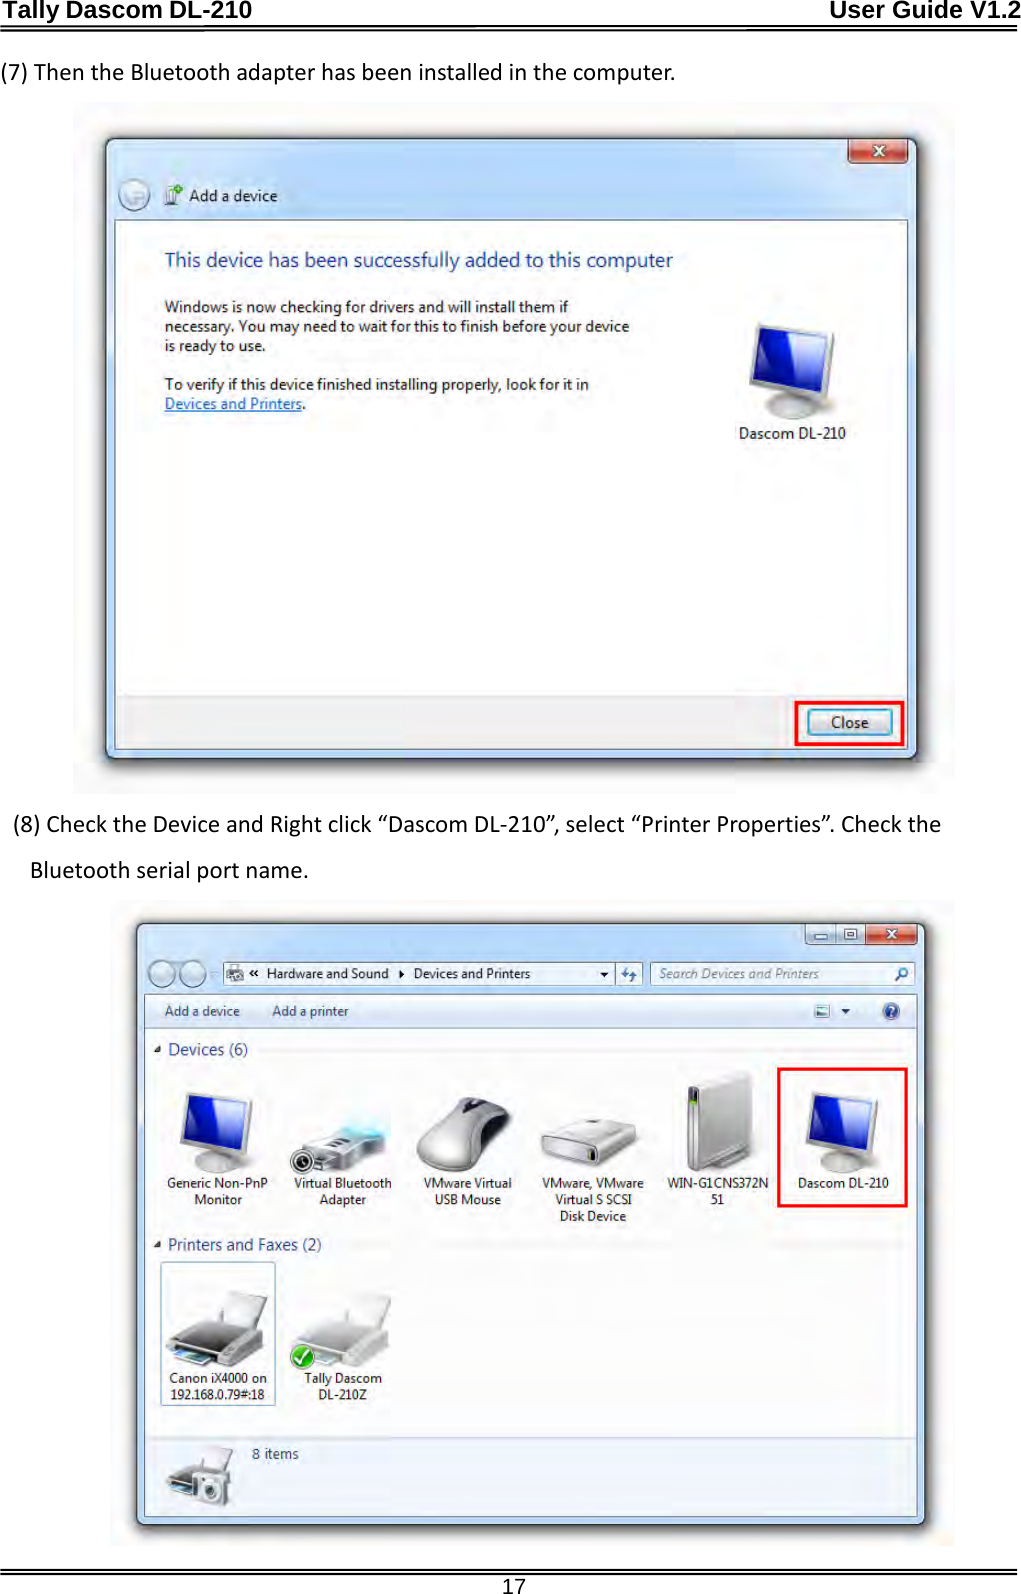 Tally Dascom DL-210                                              User Guide V1.2  17 (7) Then the Bluetooth adapter has been installed in the computer.    (8) Check the Device and Right click “Dascom DL-210”, select “Printer Properties”. Check the Bluetooth serial port name.  